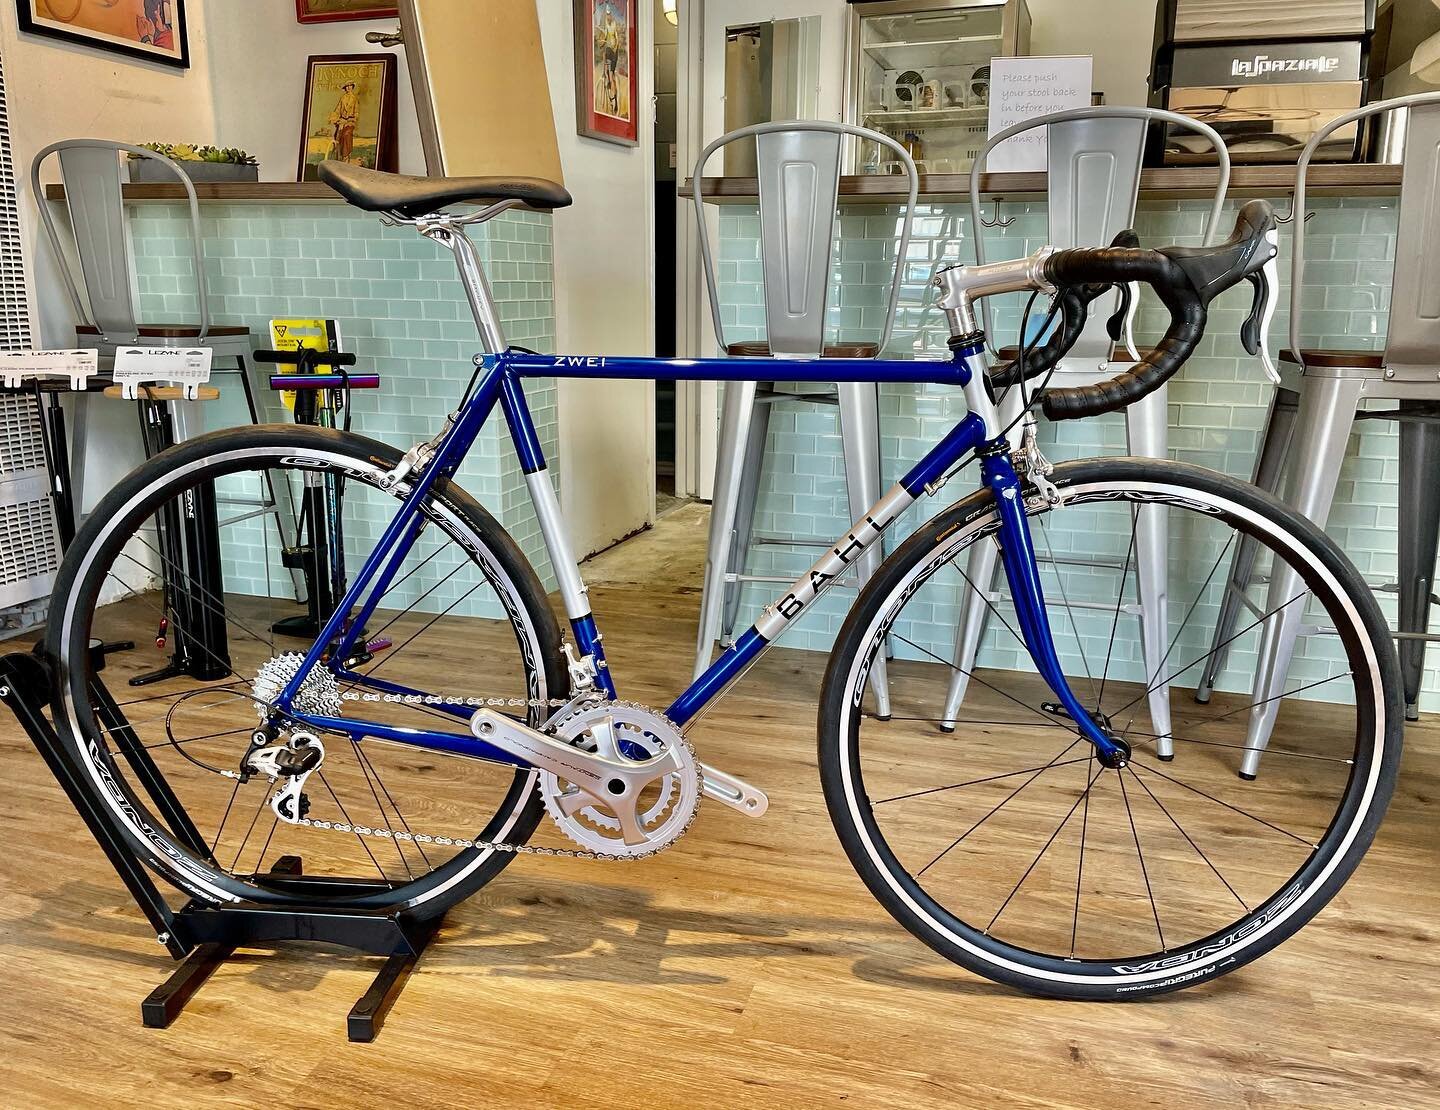 In stock fresh @bahlcycle 53cm Campy gem.  Hand made in California.  Come check it out.  #steelisrreal